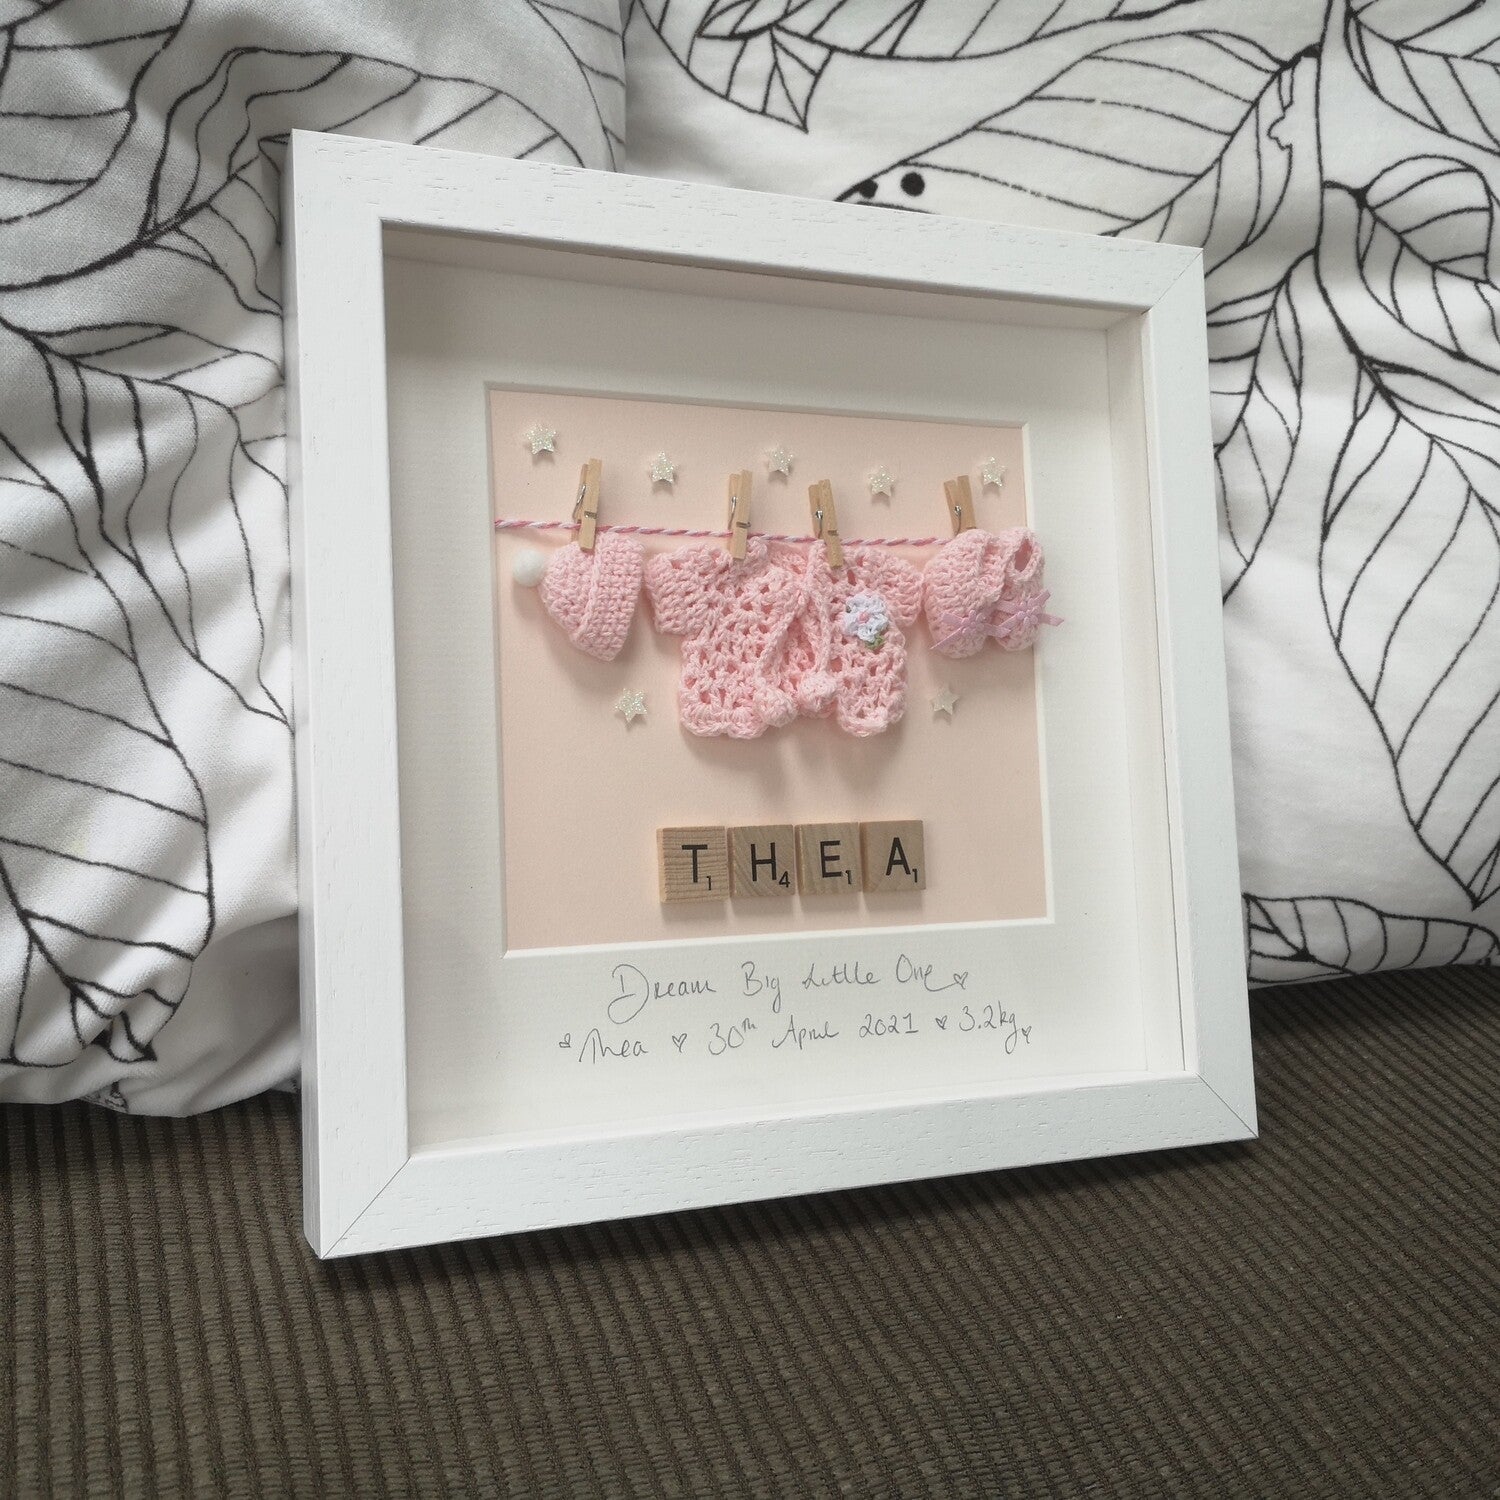 A personalised baby pink washing line with crochet hat, cardie & booties, with a name in wooden scrabble tiles below the washing line, in a handmade 25x25cm deep box wooden frame.